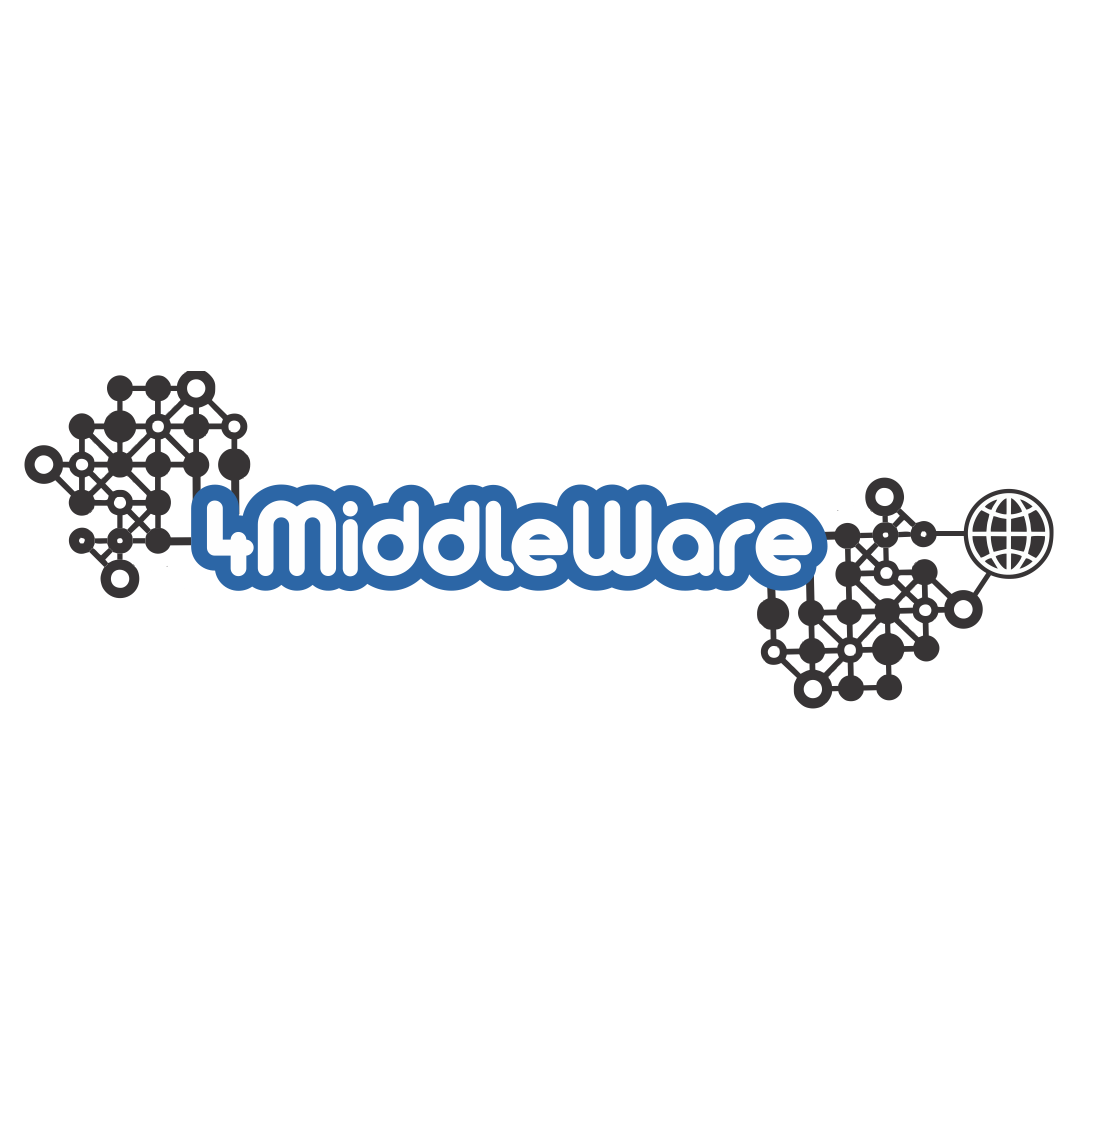 4MIDDLEWARE